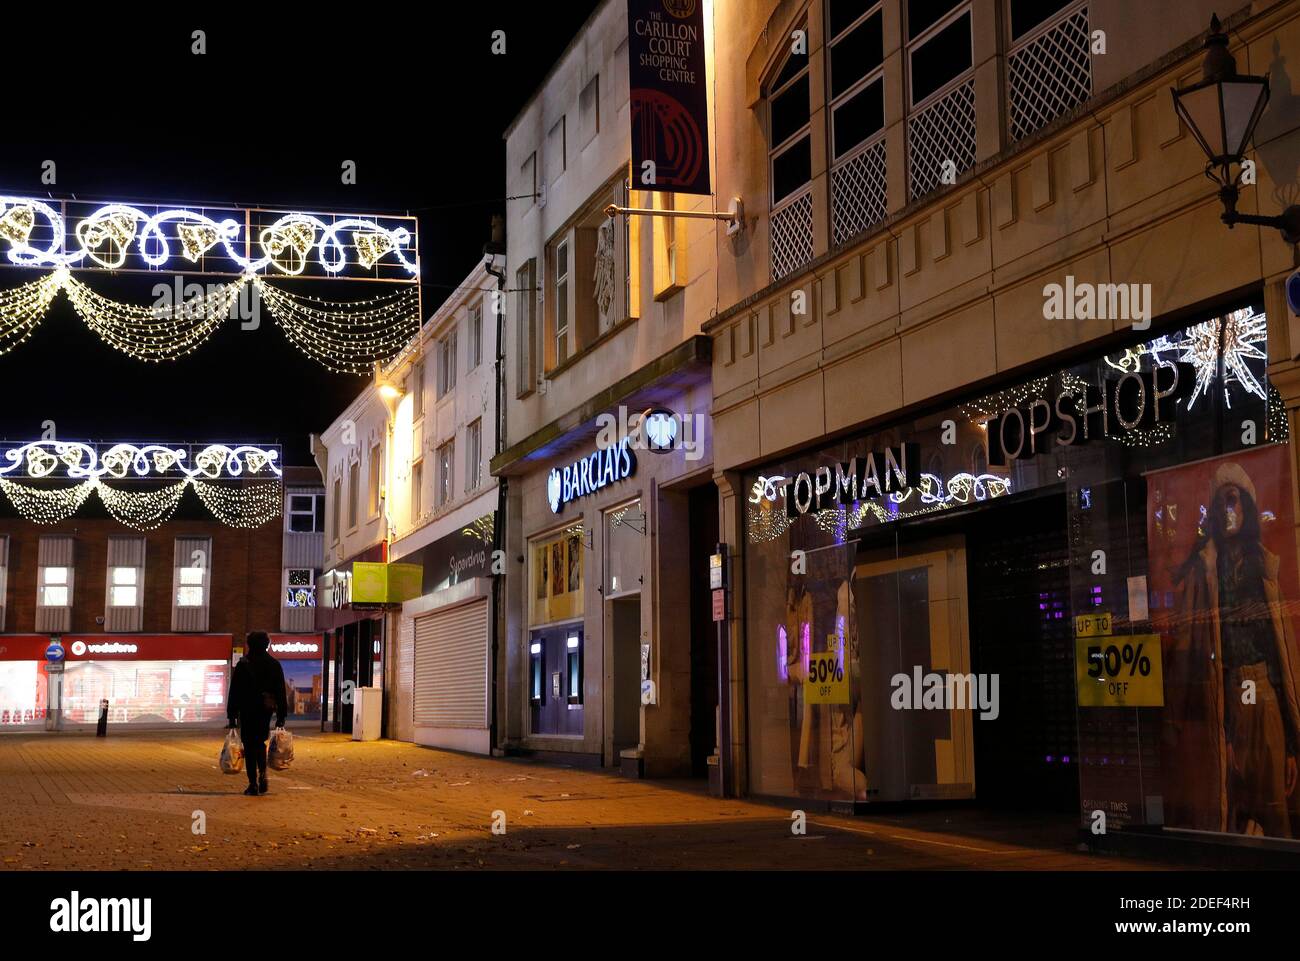 Loughborough, Leicestershire, UK. 30th November 2020. A man walks past a  Topman and Topshop store after the Arcadia Group entered into  administration putting 13,000 jobs at risk. Credit Darren Staples/Alamy  Live News